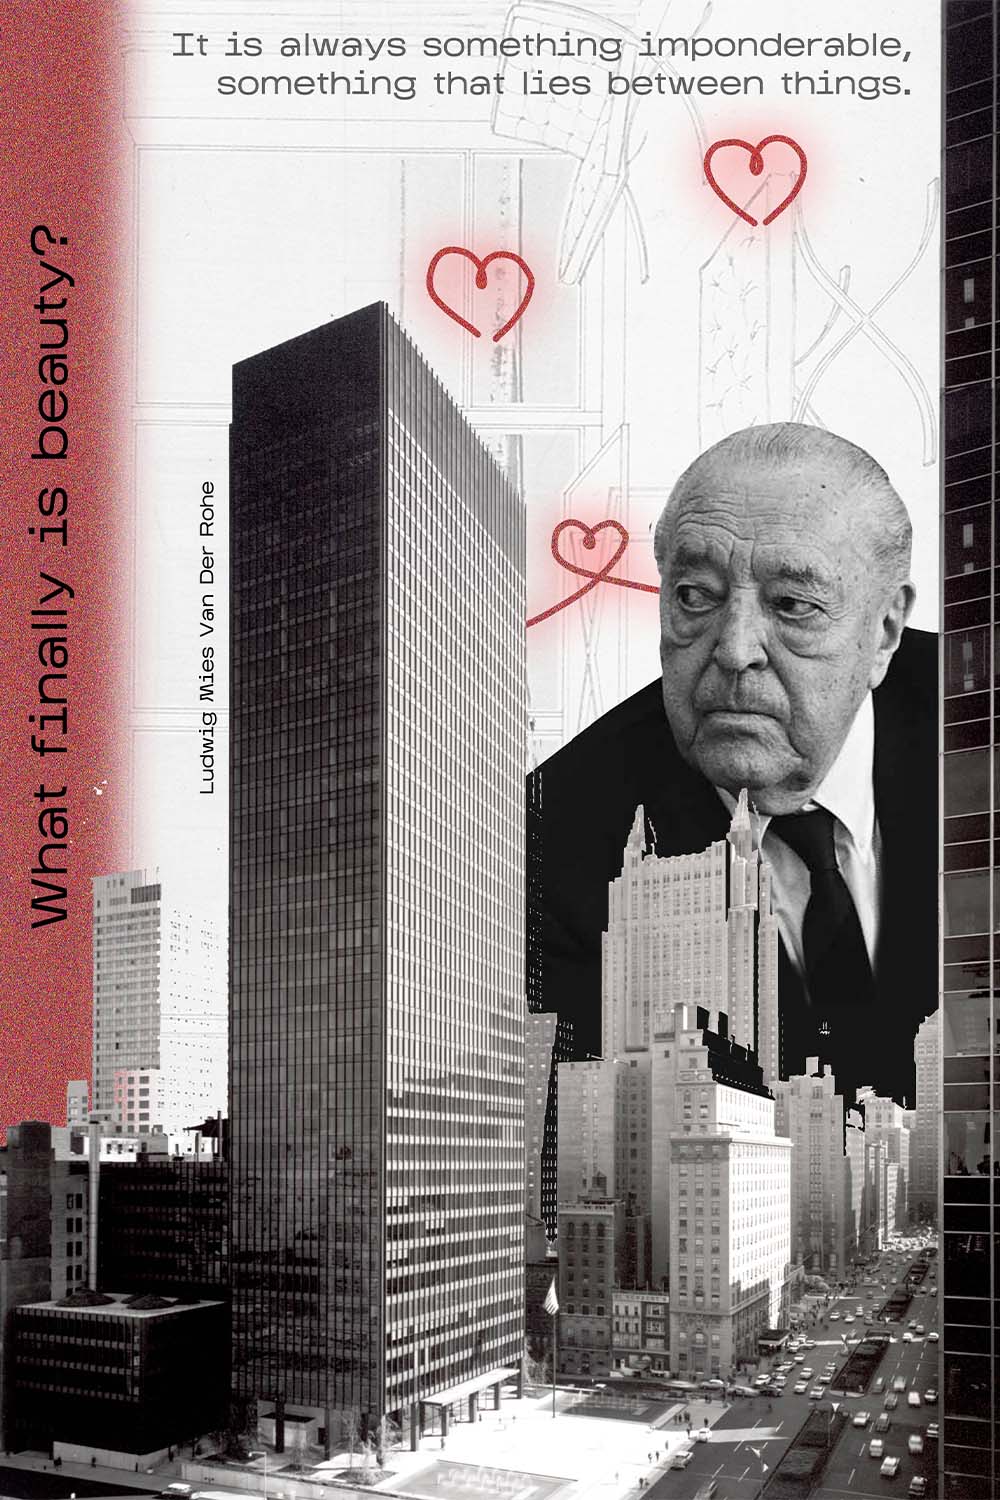 Architect Ludwig Mies Van Der Rohe Posters Pinterest Image.